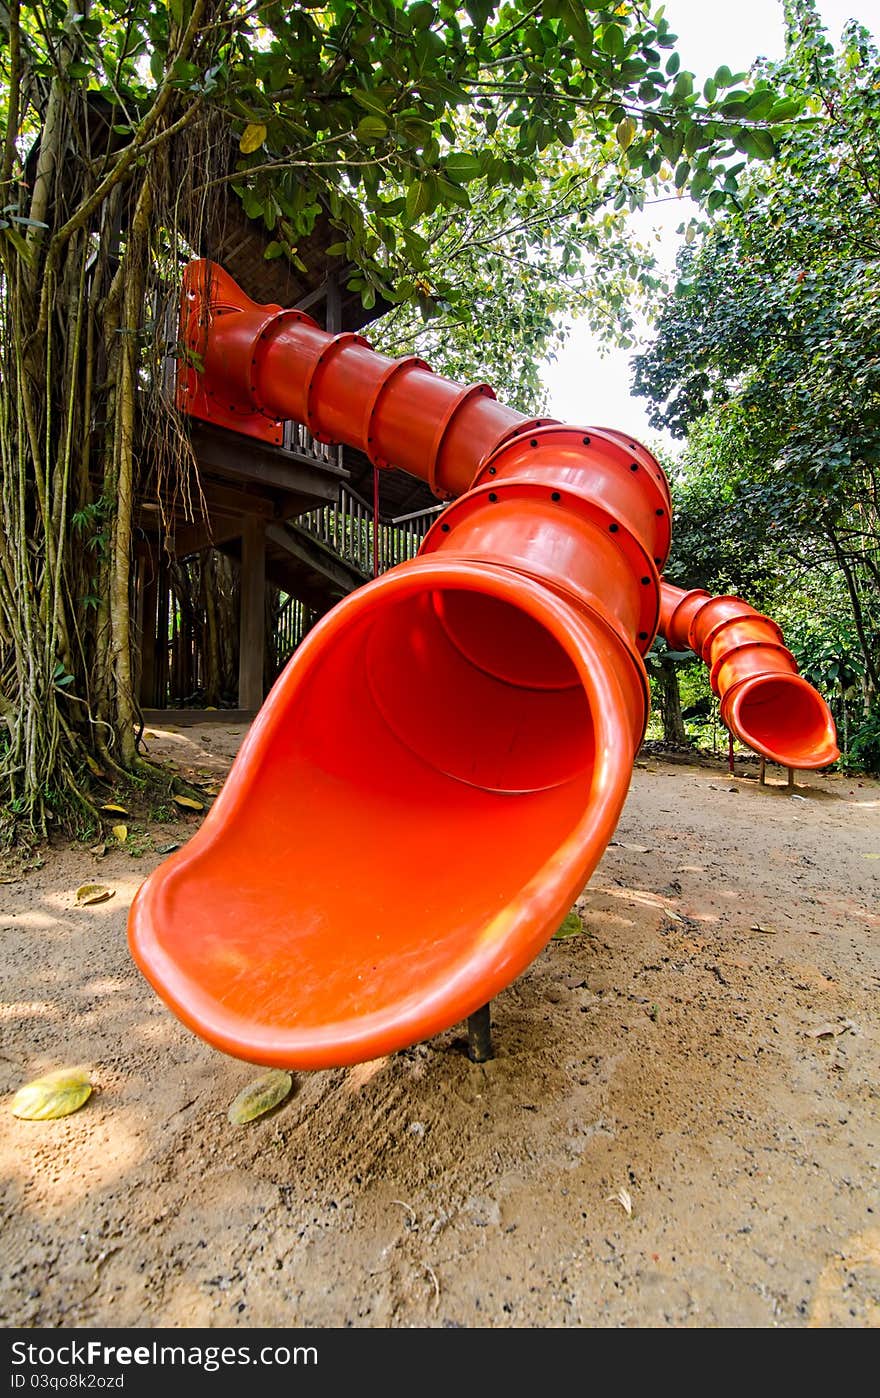 Photo of red colorful slide and a treehouse in garden or backyard of nursery school play area. Photo of red colorful slide and a treehouse in garden or backyard of nursery school play area